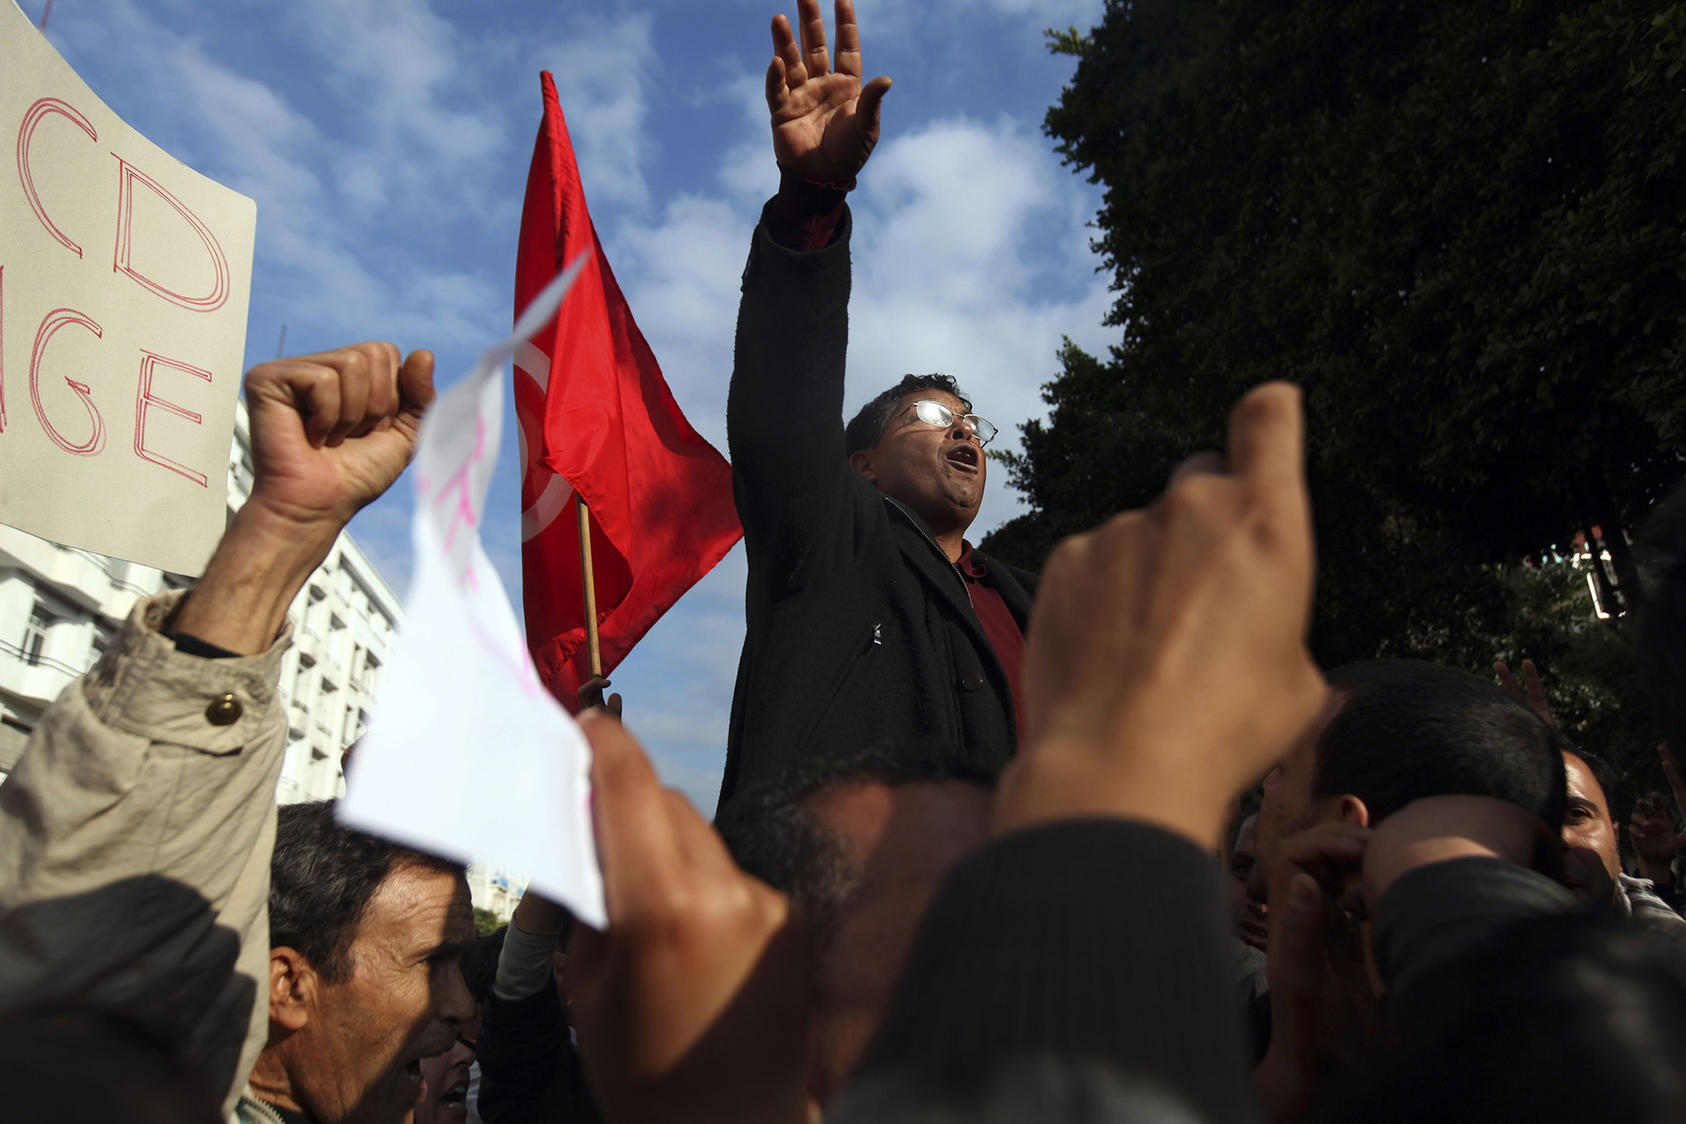 Demonstrators sing the Tunisian National Anthem during a protest in Tunis, Tunisia, Jan. 19, 2011. (Holly Pickett/The New York Times)